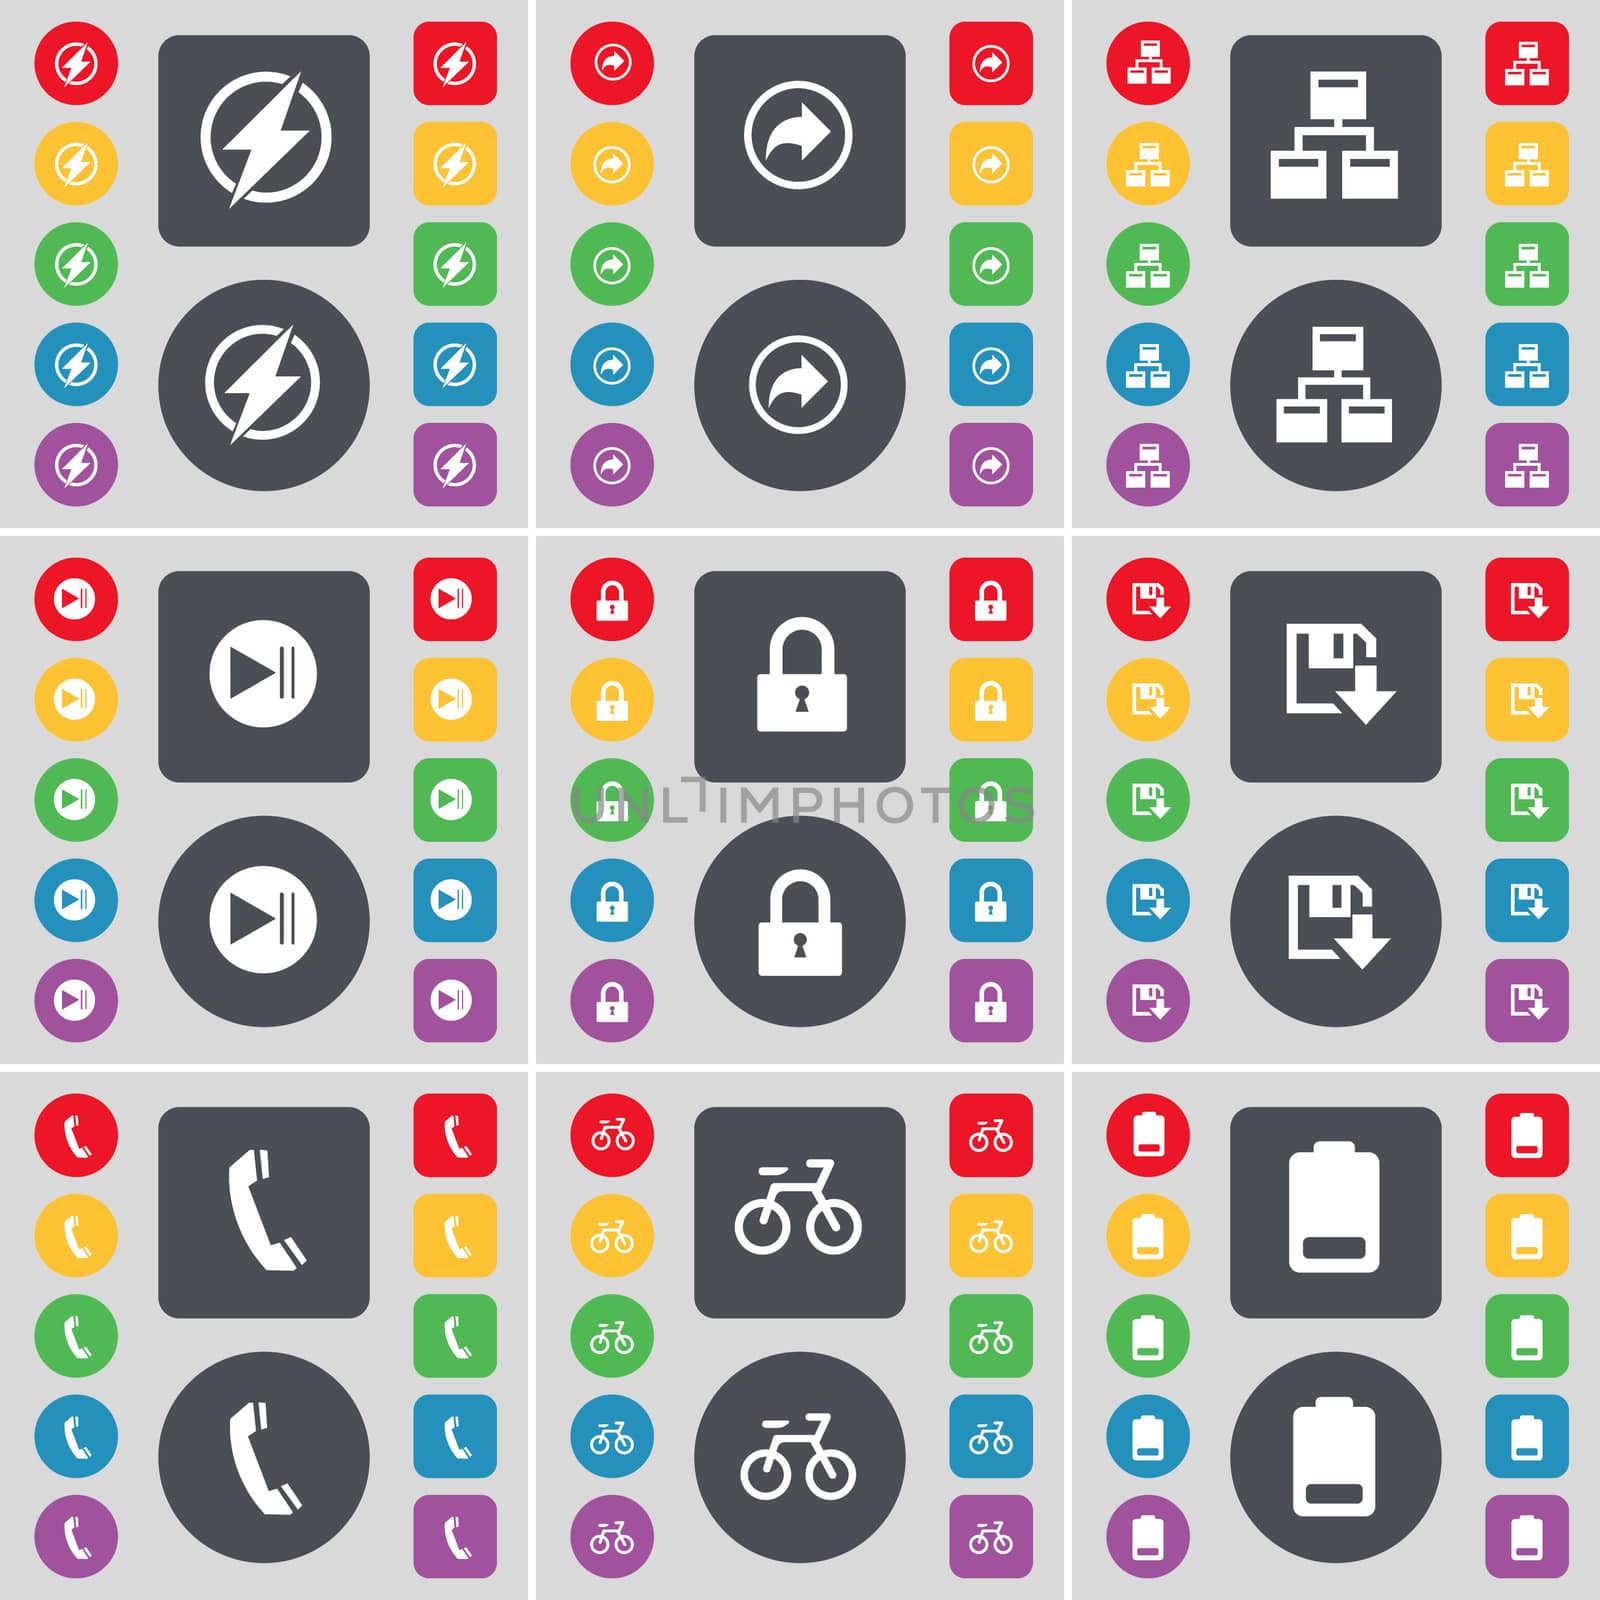 Flash, Back, Network, Media skip, Lock, Floppy, Receiver, Bicycling, Battery icon symbol. A large set of flat, colored buttons for your design. illustration